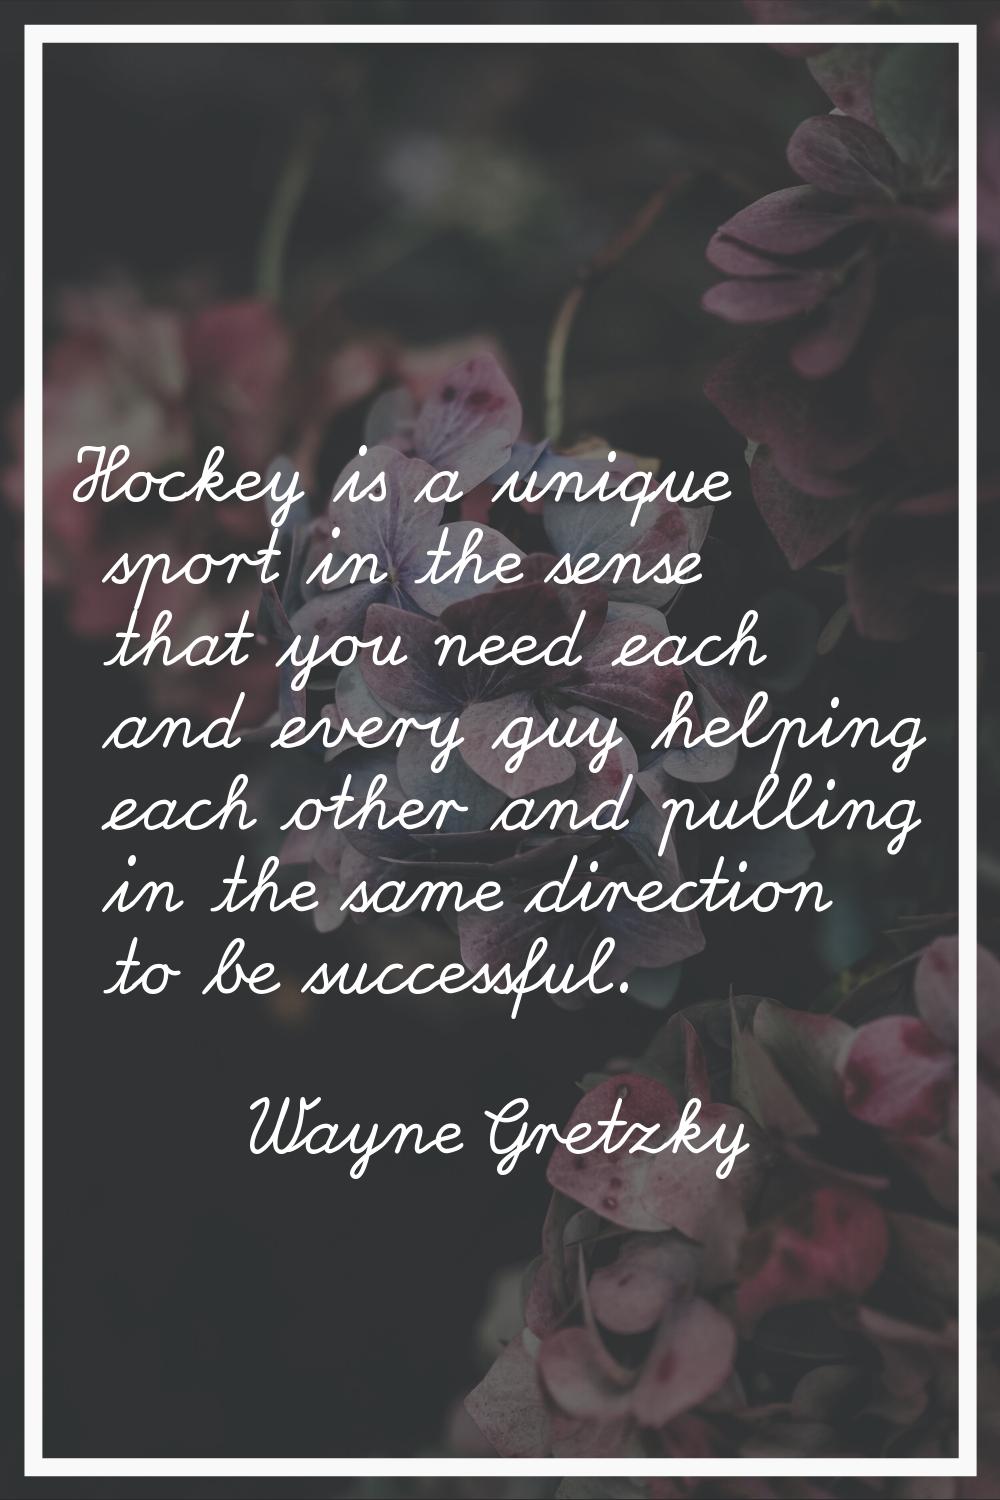 Hockey is a unique sport in the sense that you need each and every guy helping each other and pulli